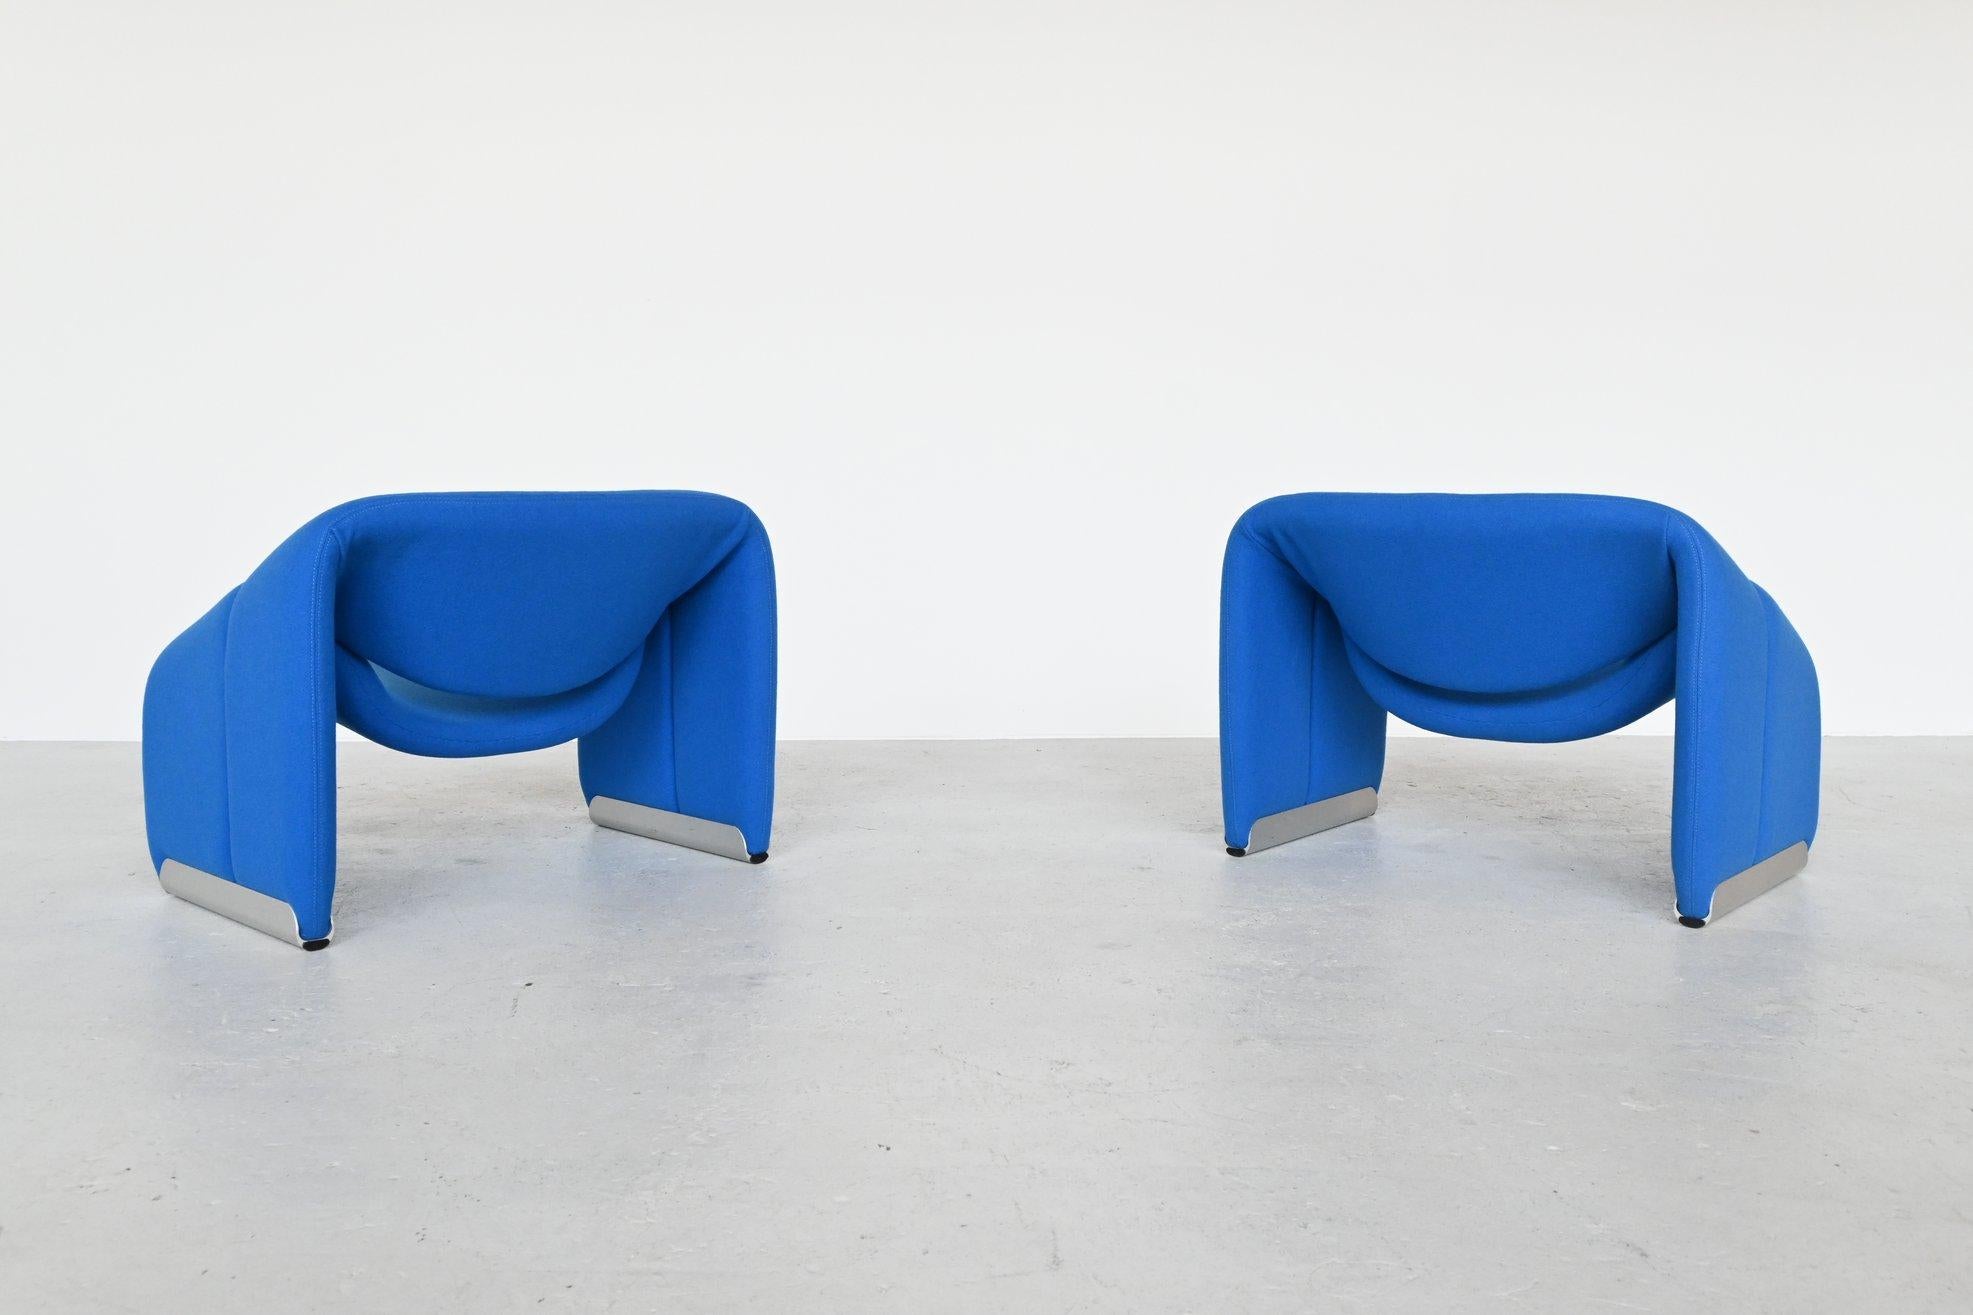 Dutch Pierre Paulin Pair of F598 Groovy Lounge Chairs Artifort, the Netherlands, 1972